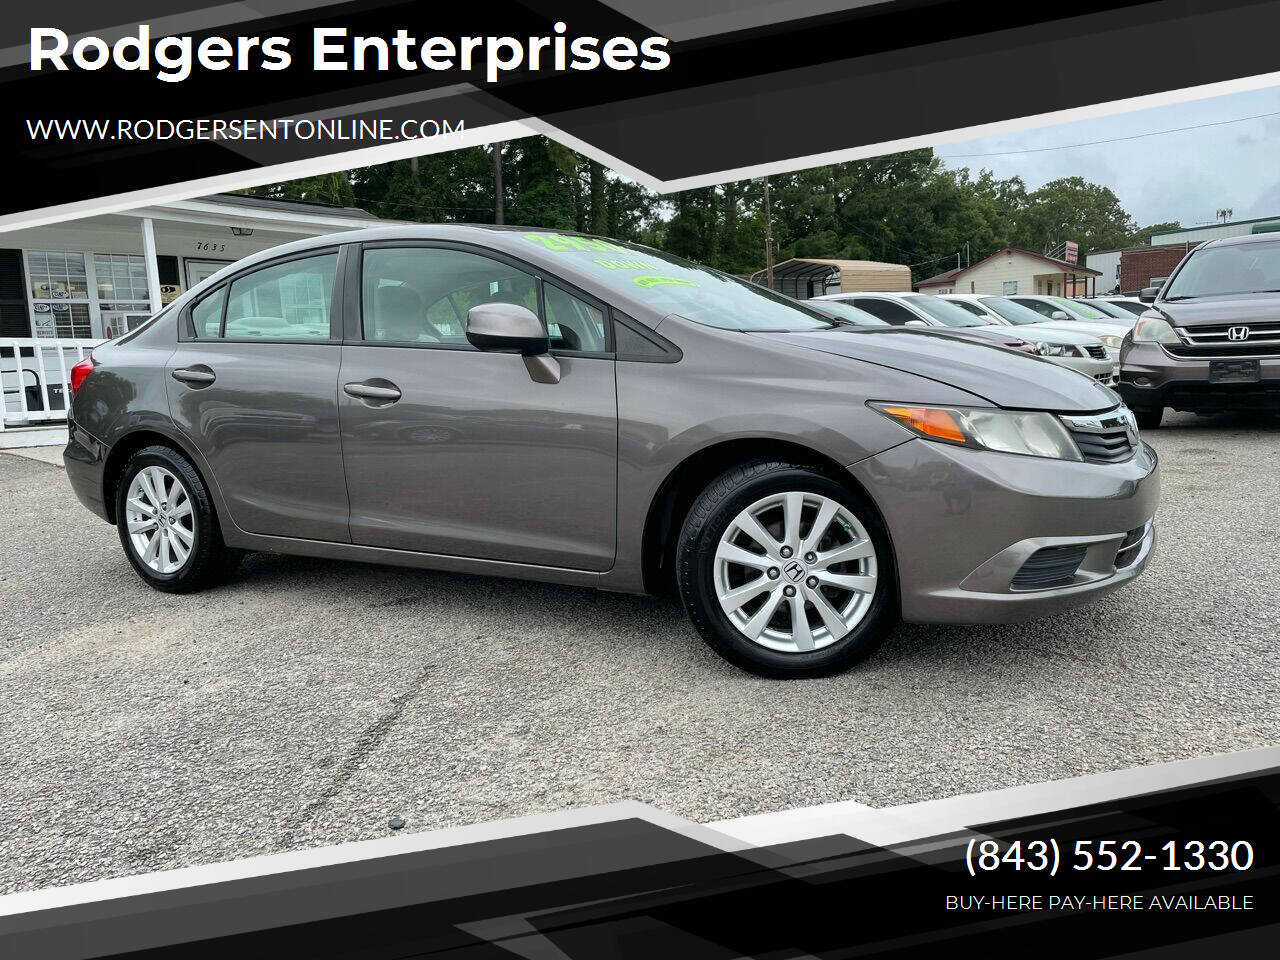 used cars for sale buy here pay here north charleston sc 29406 byrider on buy here pay here dealerships charleston sc